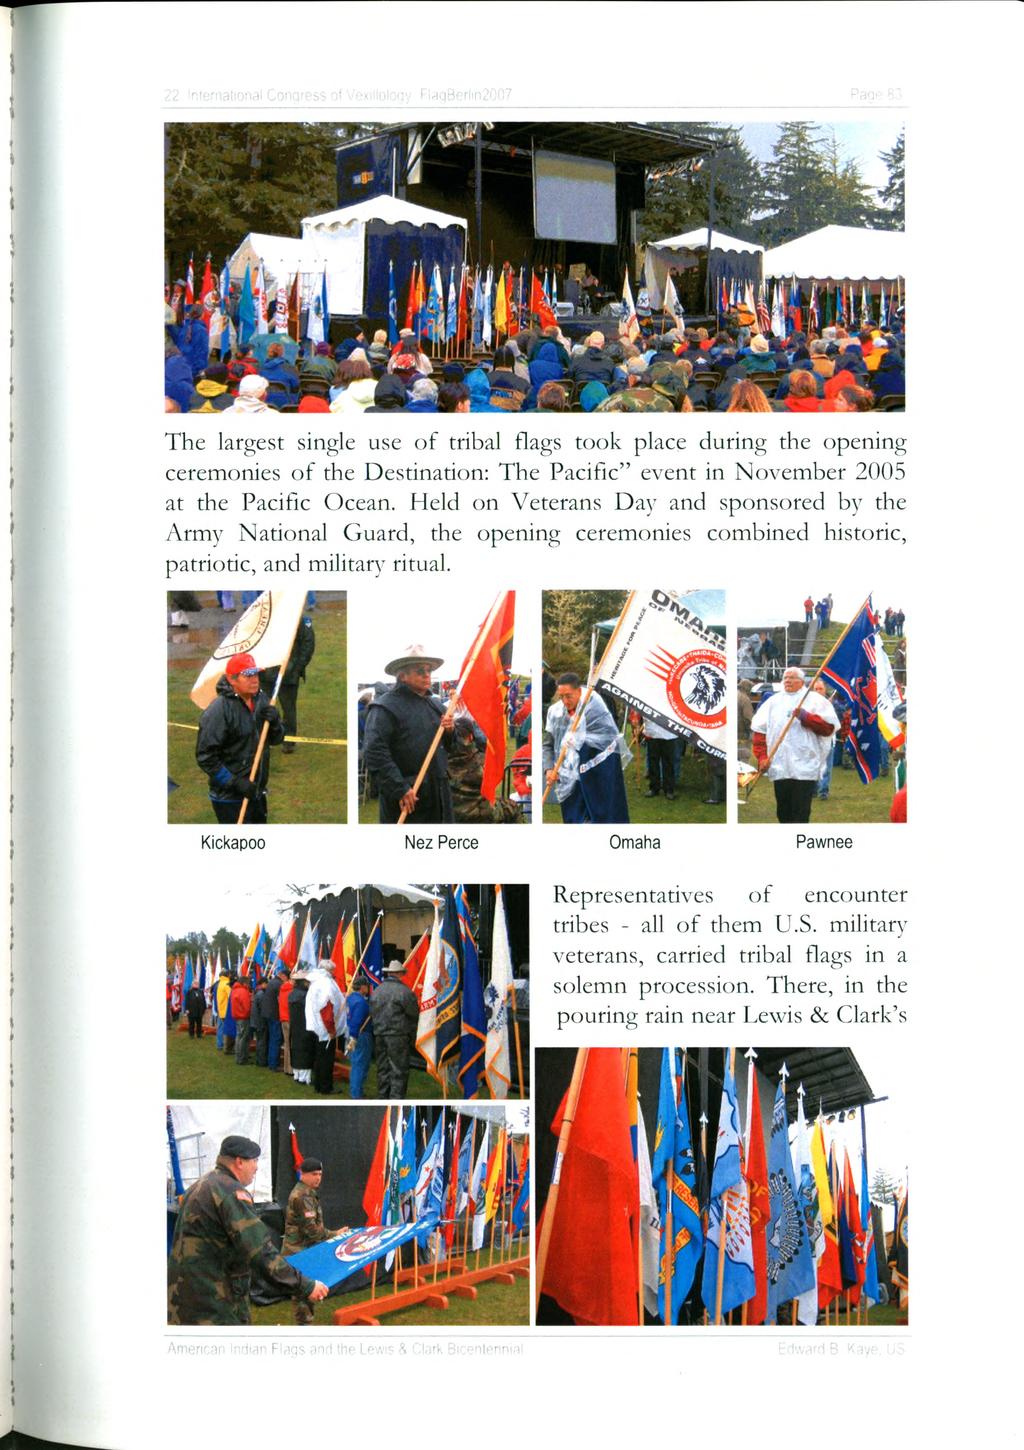 The largest single use of tribal flags took place during the opening ceremonies of the Destination: The Pacific event in November 2005 at the Pacific Ocean.